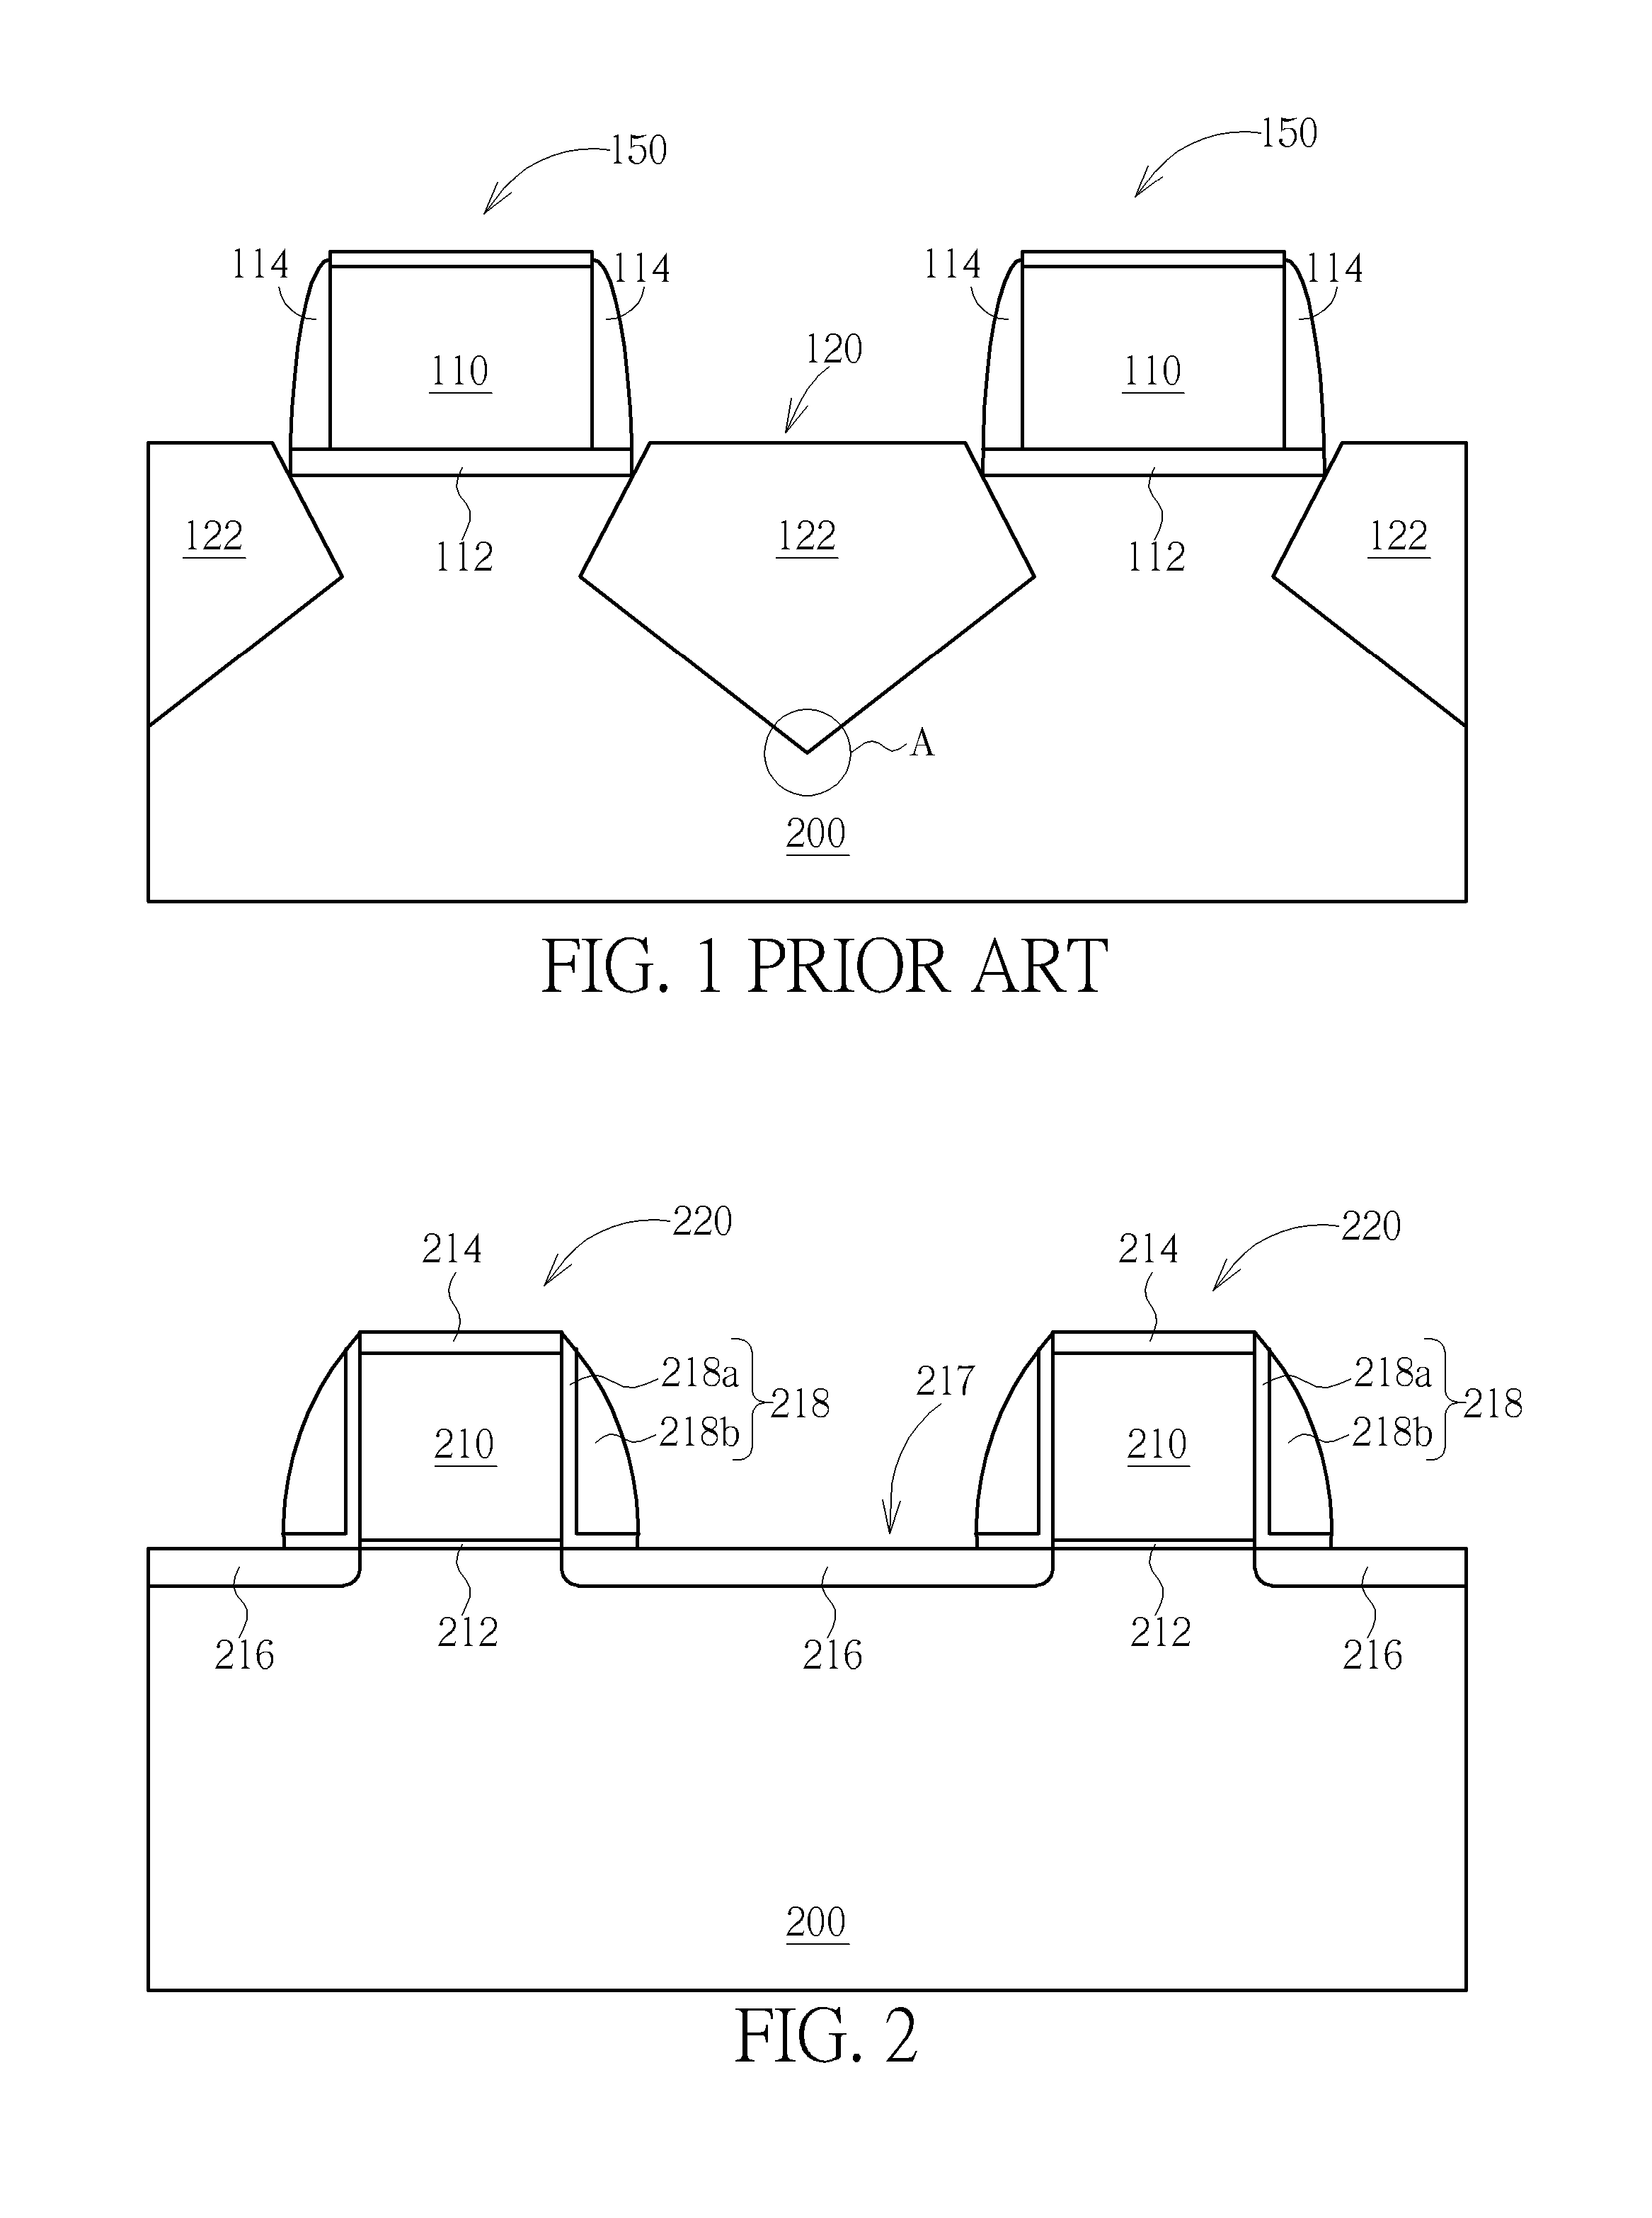 Manufacturing method for forming semiconductor structure